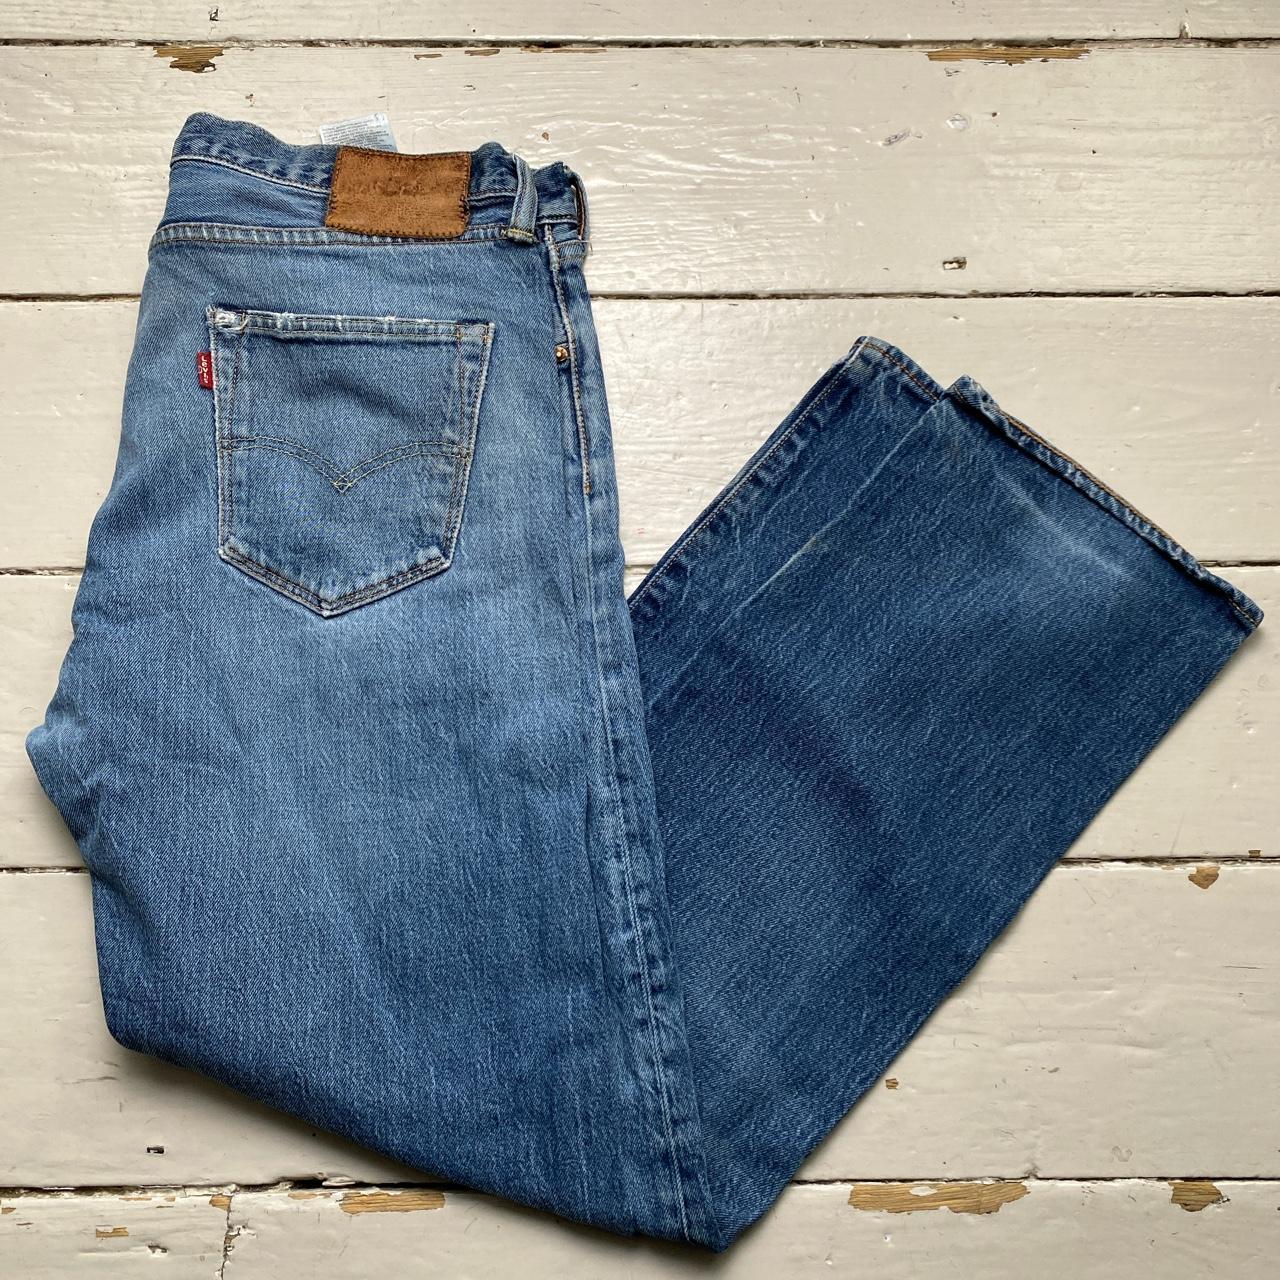 Levis 501 Baggy Stonewashed Jeans